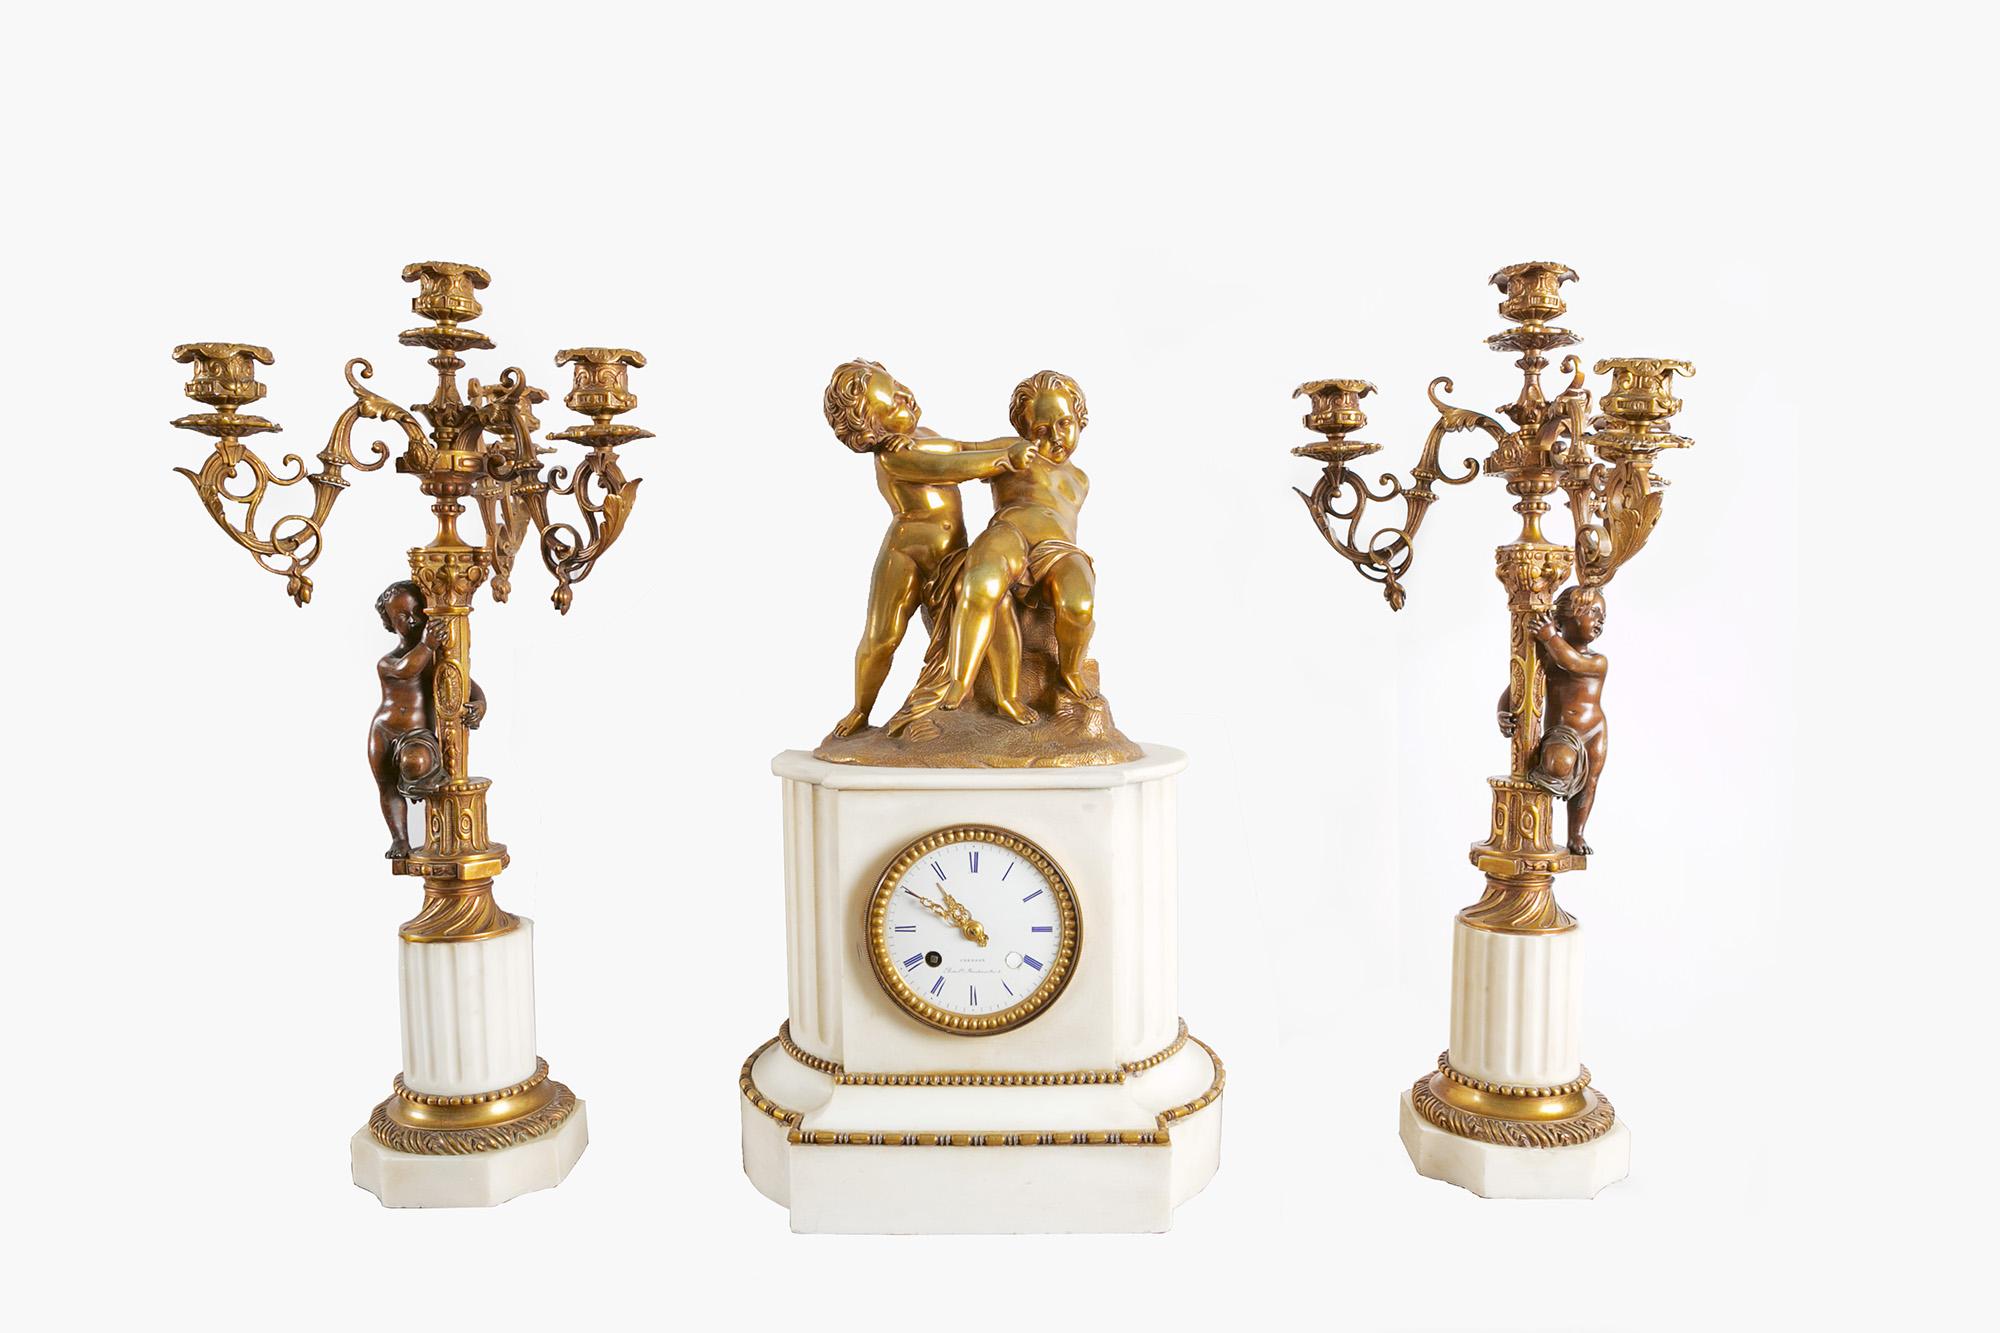 19th Century French Gilt Bronze and Marble figural Clock Garniture Set In Good Condition For Sale In Dublin 8, IE